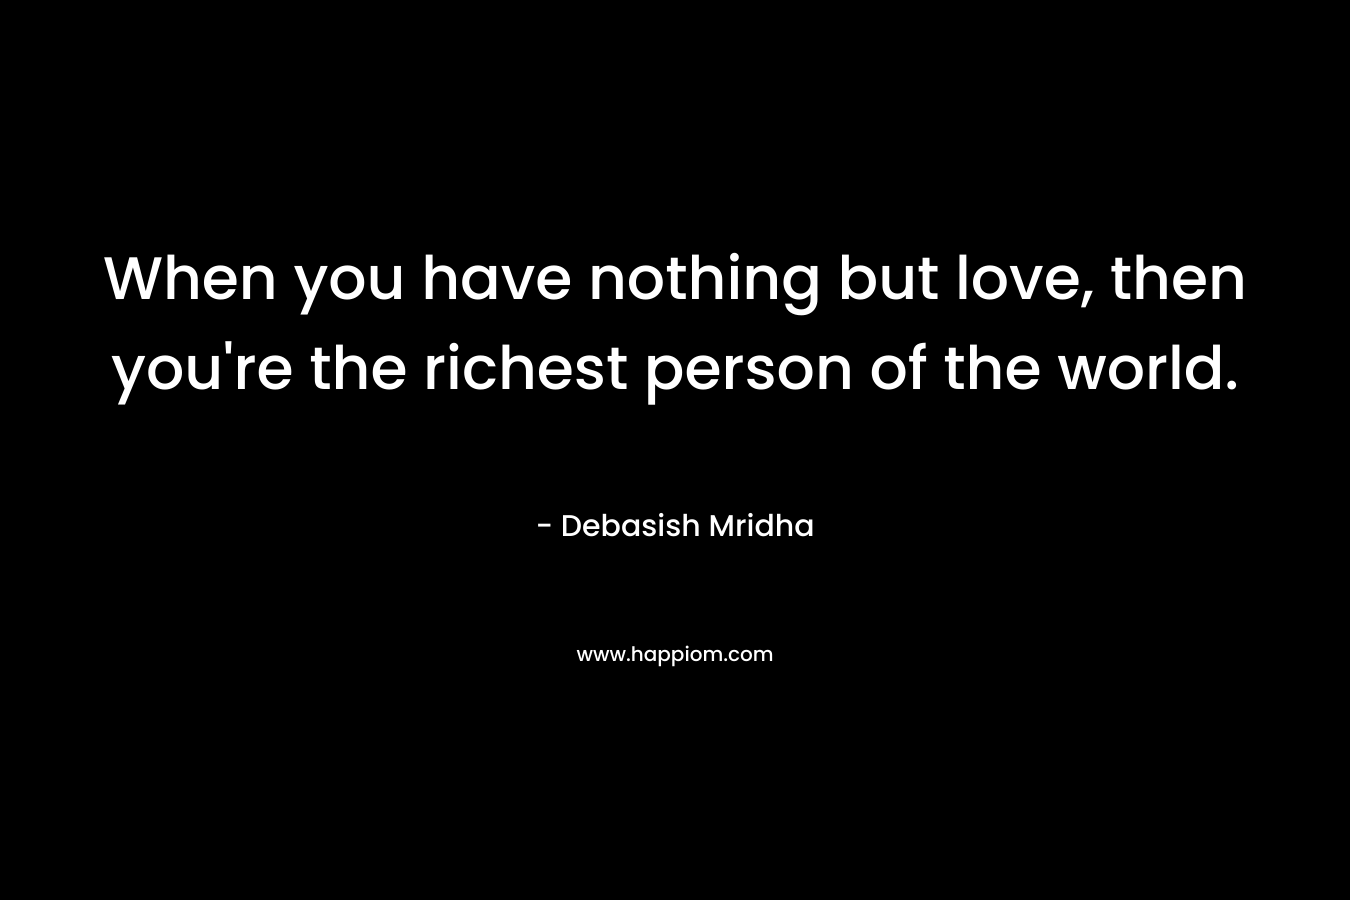 When you have nothing but love, then you’re the richest person of the world. – Debasish Mridha